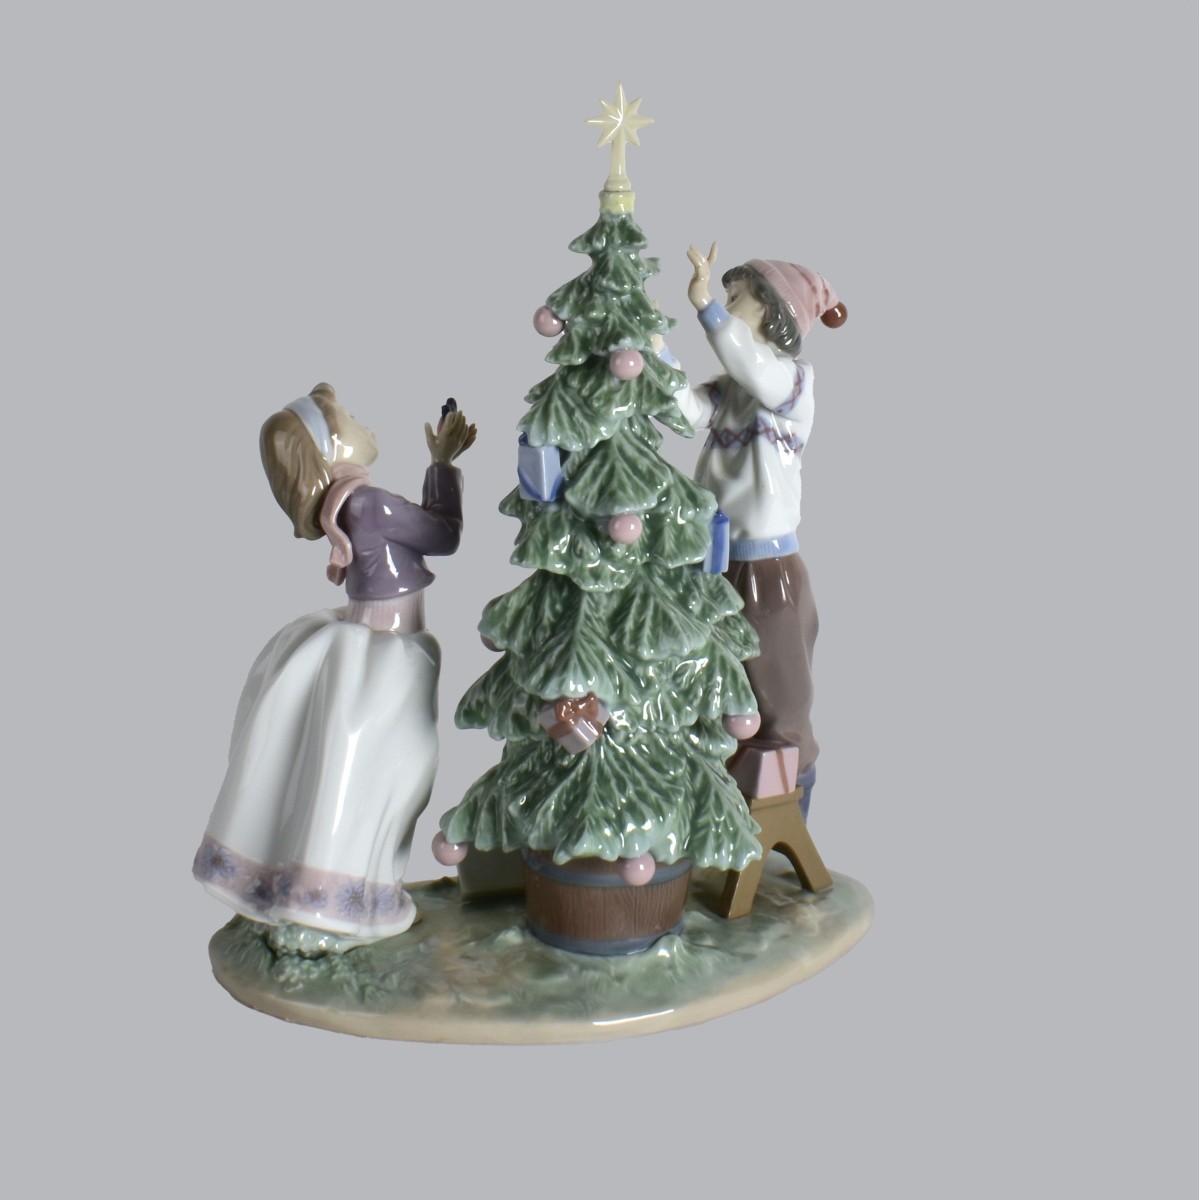 Lladro "Trimming The Tree" Group